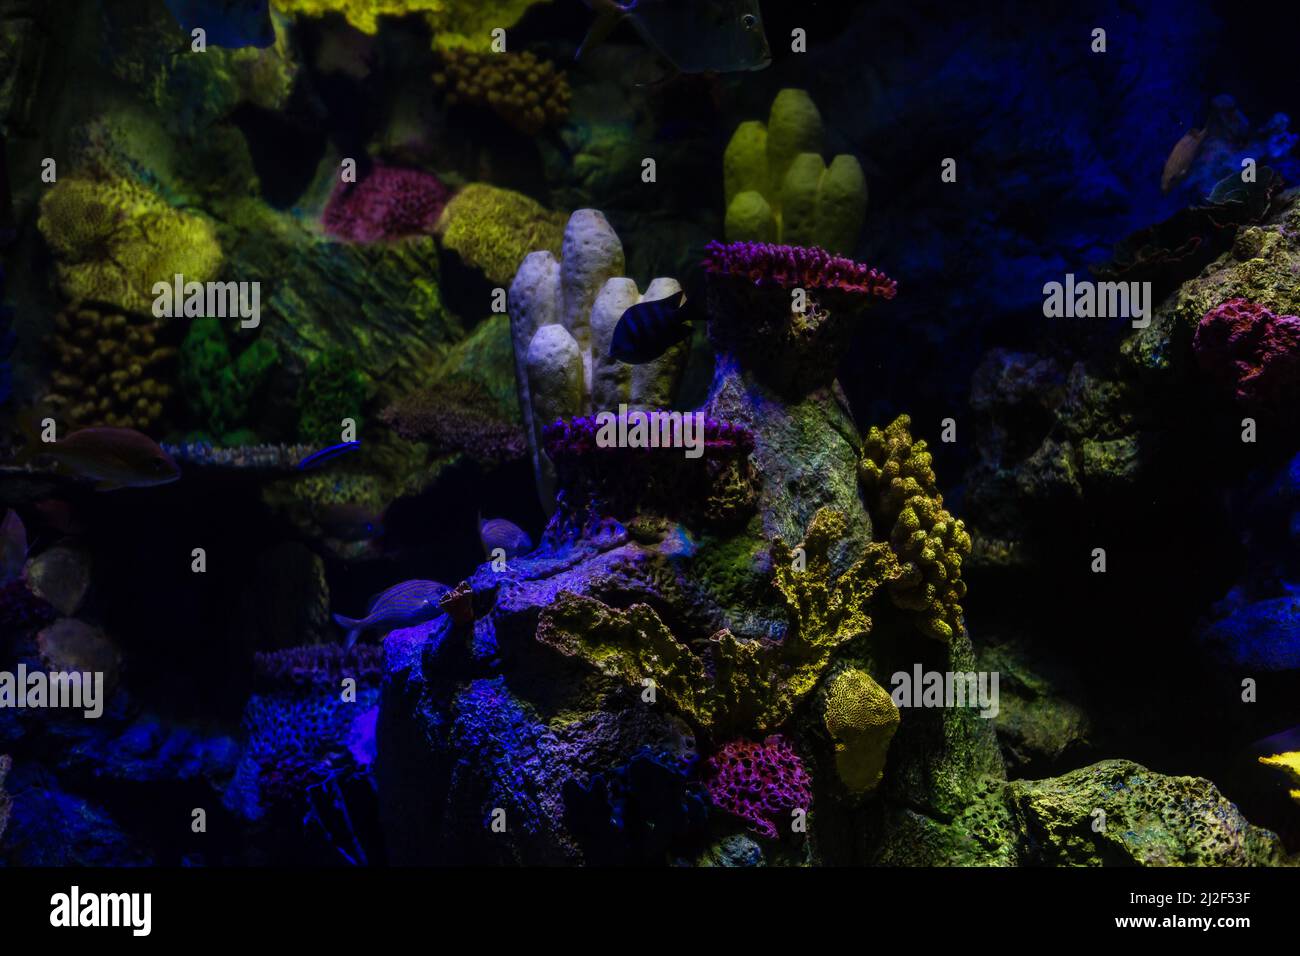 A marine aquarium with fishes and corals Stock Photo